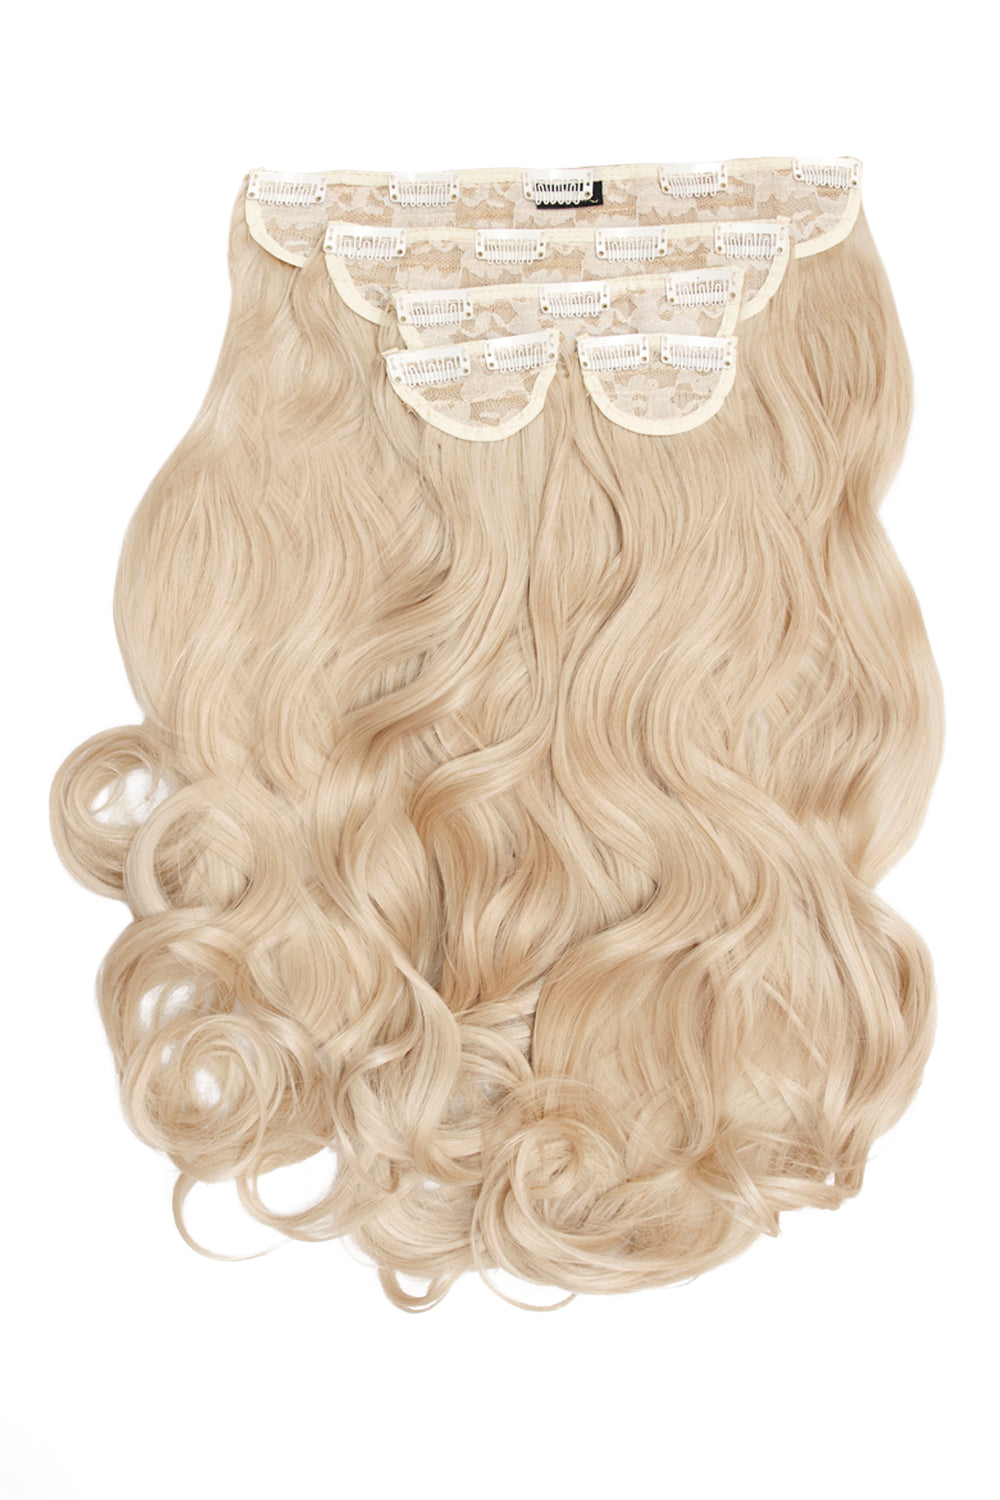 Super Thick 22" 5 Piece Curly Clip Hair Extensions + Hair Care Bundle - Golden Blonde